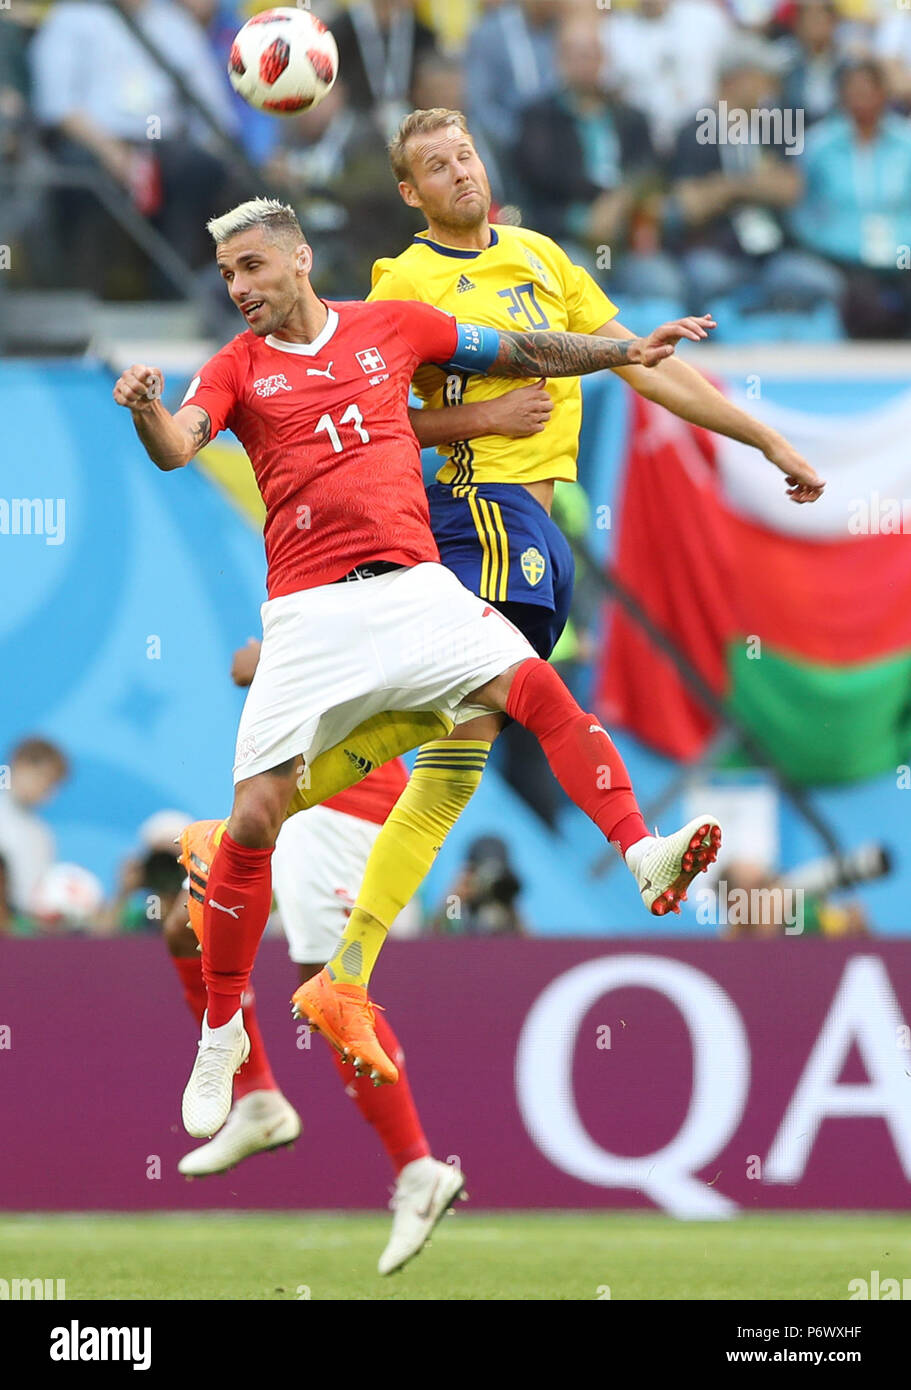 Saint Petersburg, Russia. 3rd July, 2018. Valon Behrami (L) of Switzerland vies with Ola Toivonen of Sweden during the 2018 FIFA World Cup round of 16 match between Switzerland and Sweden in Saint Petersburg, Russia, July 3, 2018. Sweden won 1-0 and advanced to the quarter-final. Credit: Xu Zijian/Xinhua/Alamy Live News Stock Photo